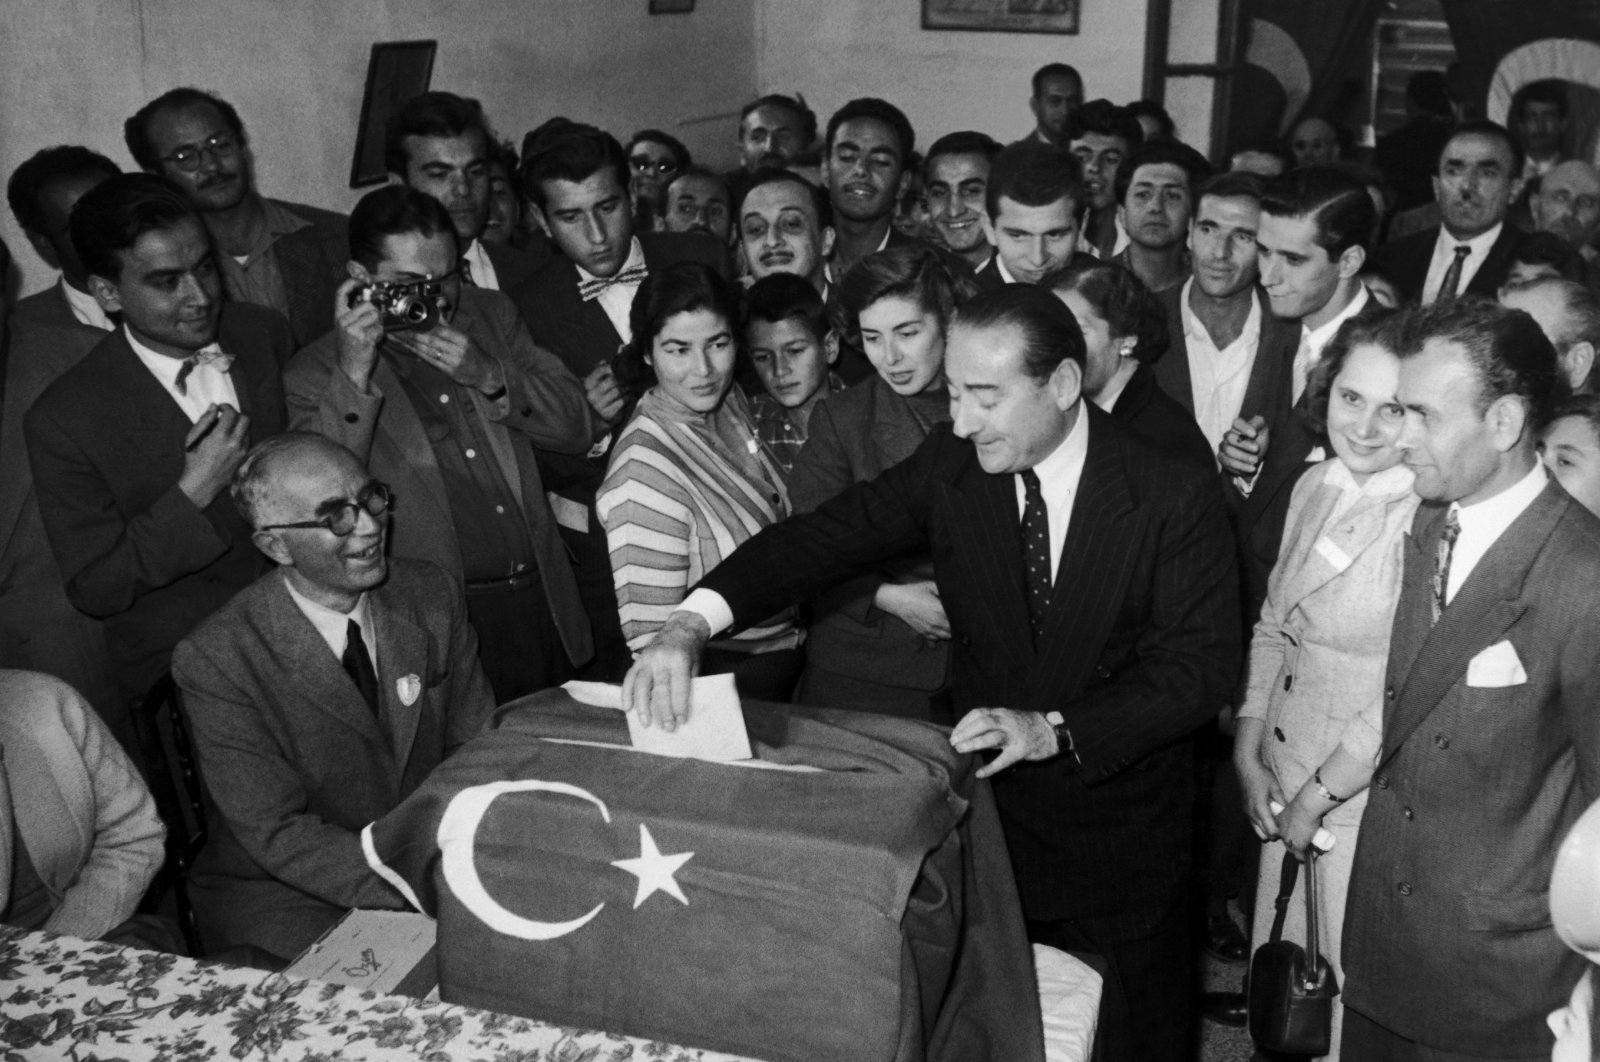 Then-Prime Minister Adnan Menderes votes during an elections in capital Ankara, Türkiye, May 2, 1954. (Getty Images Photo)